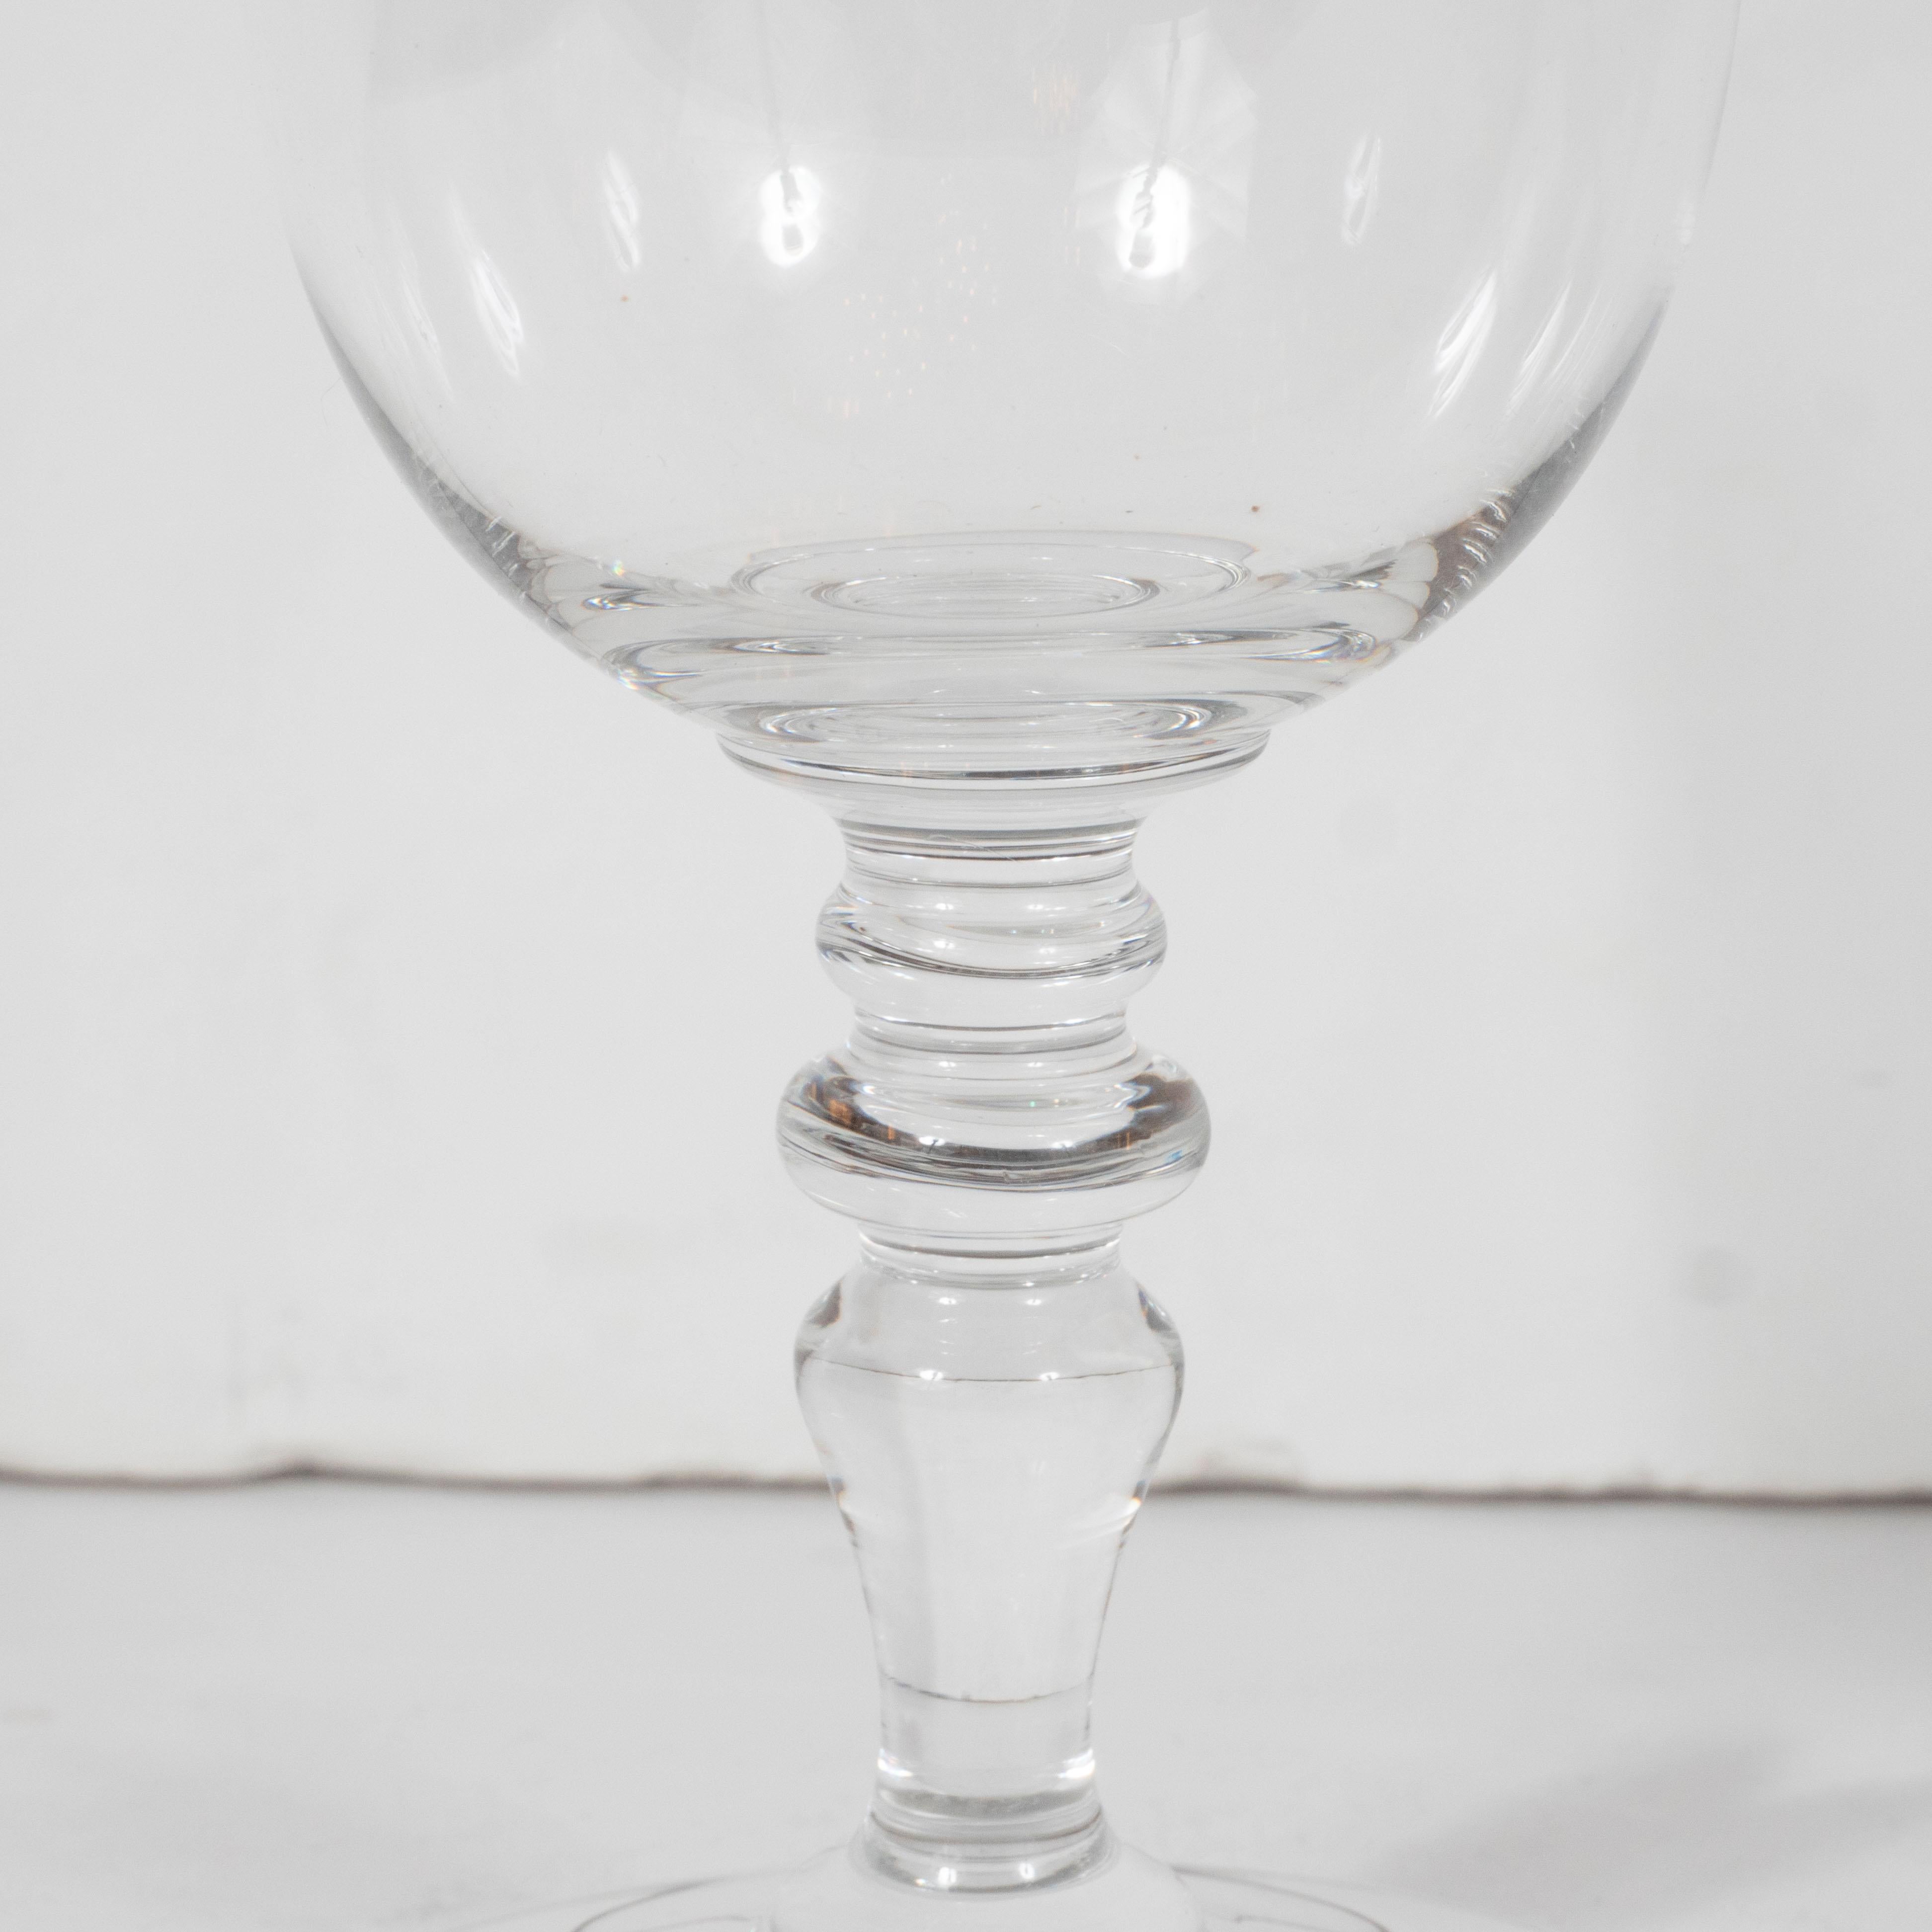 Mid-20th Century Set of Four Mid-Century Modern Signed Baccarat Crystal Glasses